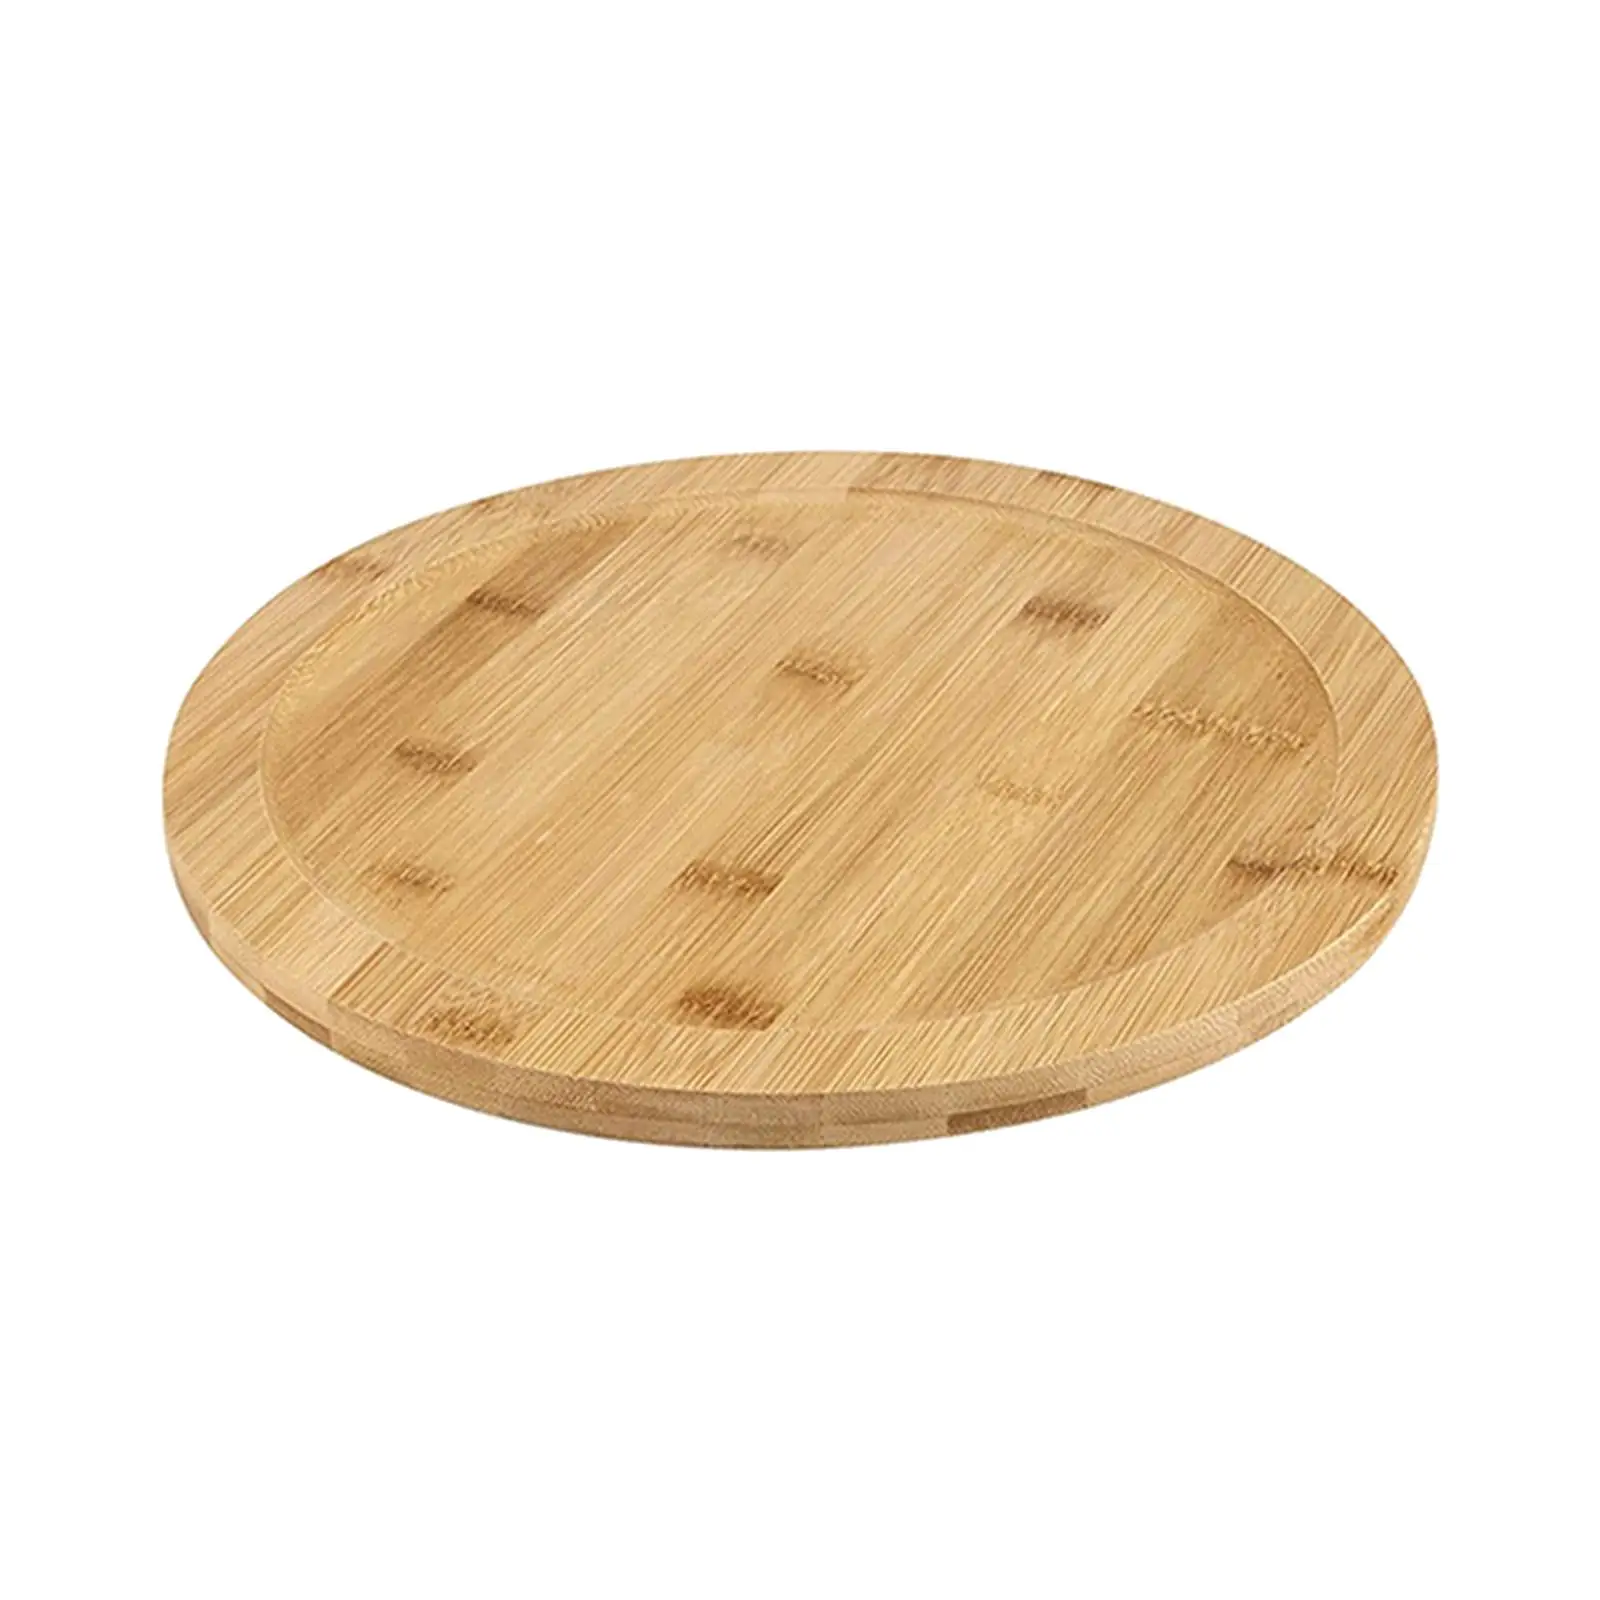 Wooden Round Rotating Plate Rotating Wooden Tray for Kitchen Countertop Home